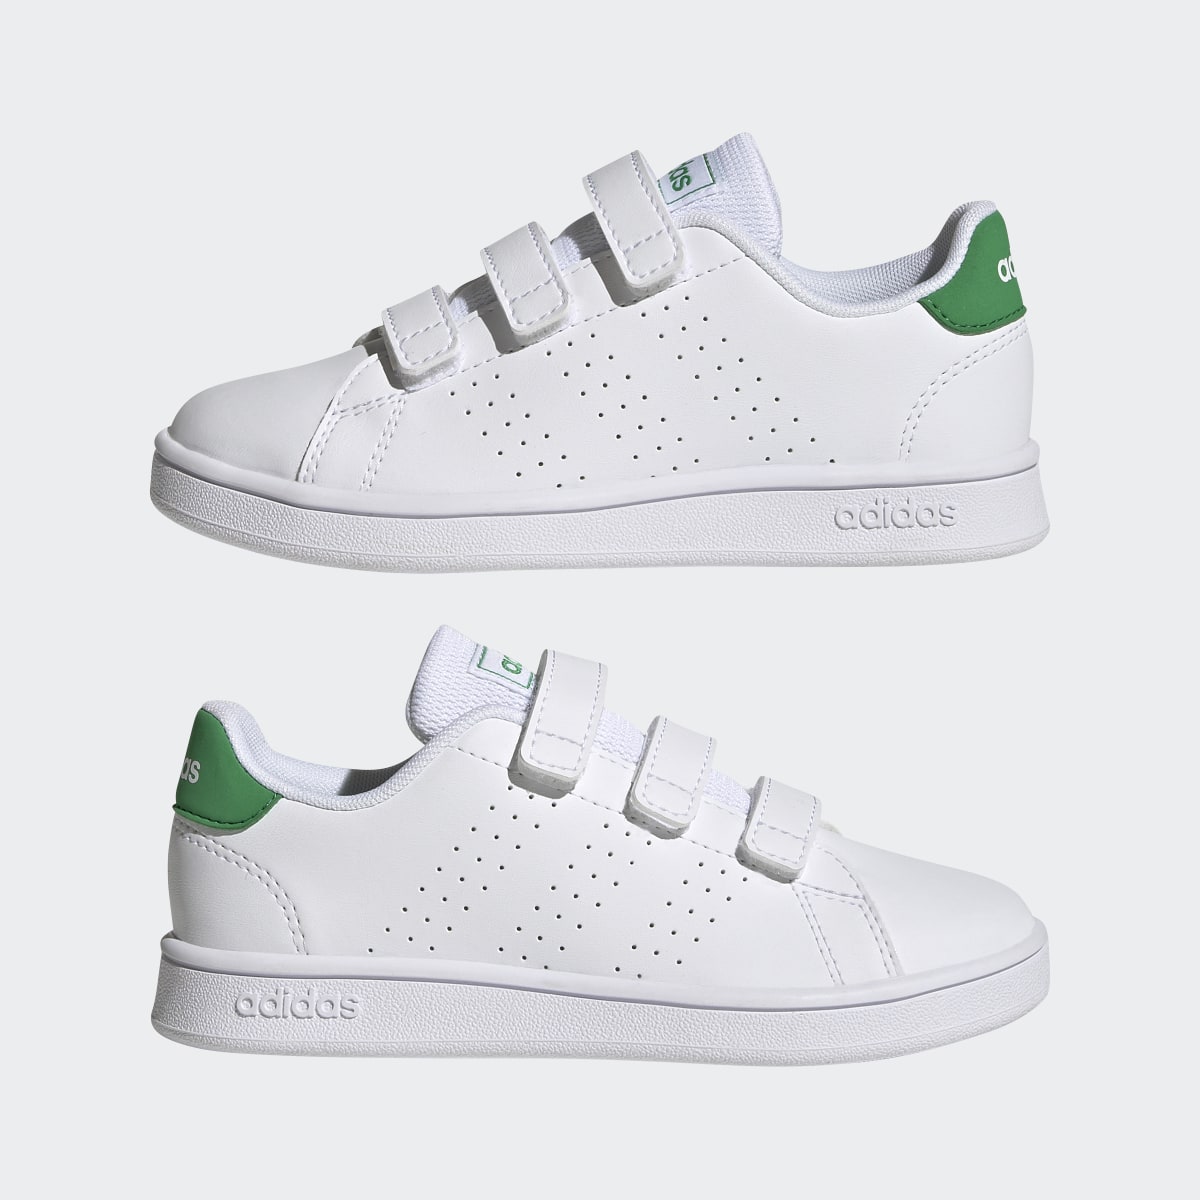 Adidas Advantage Court Lifestyle Hook-and-Loop Shoes. 8